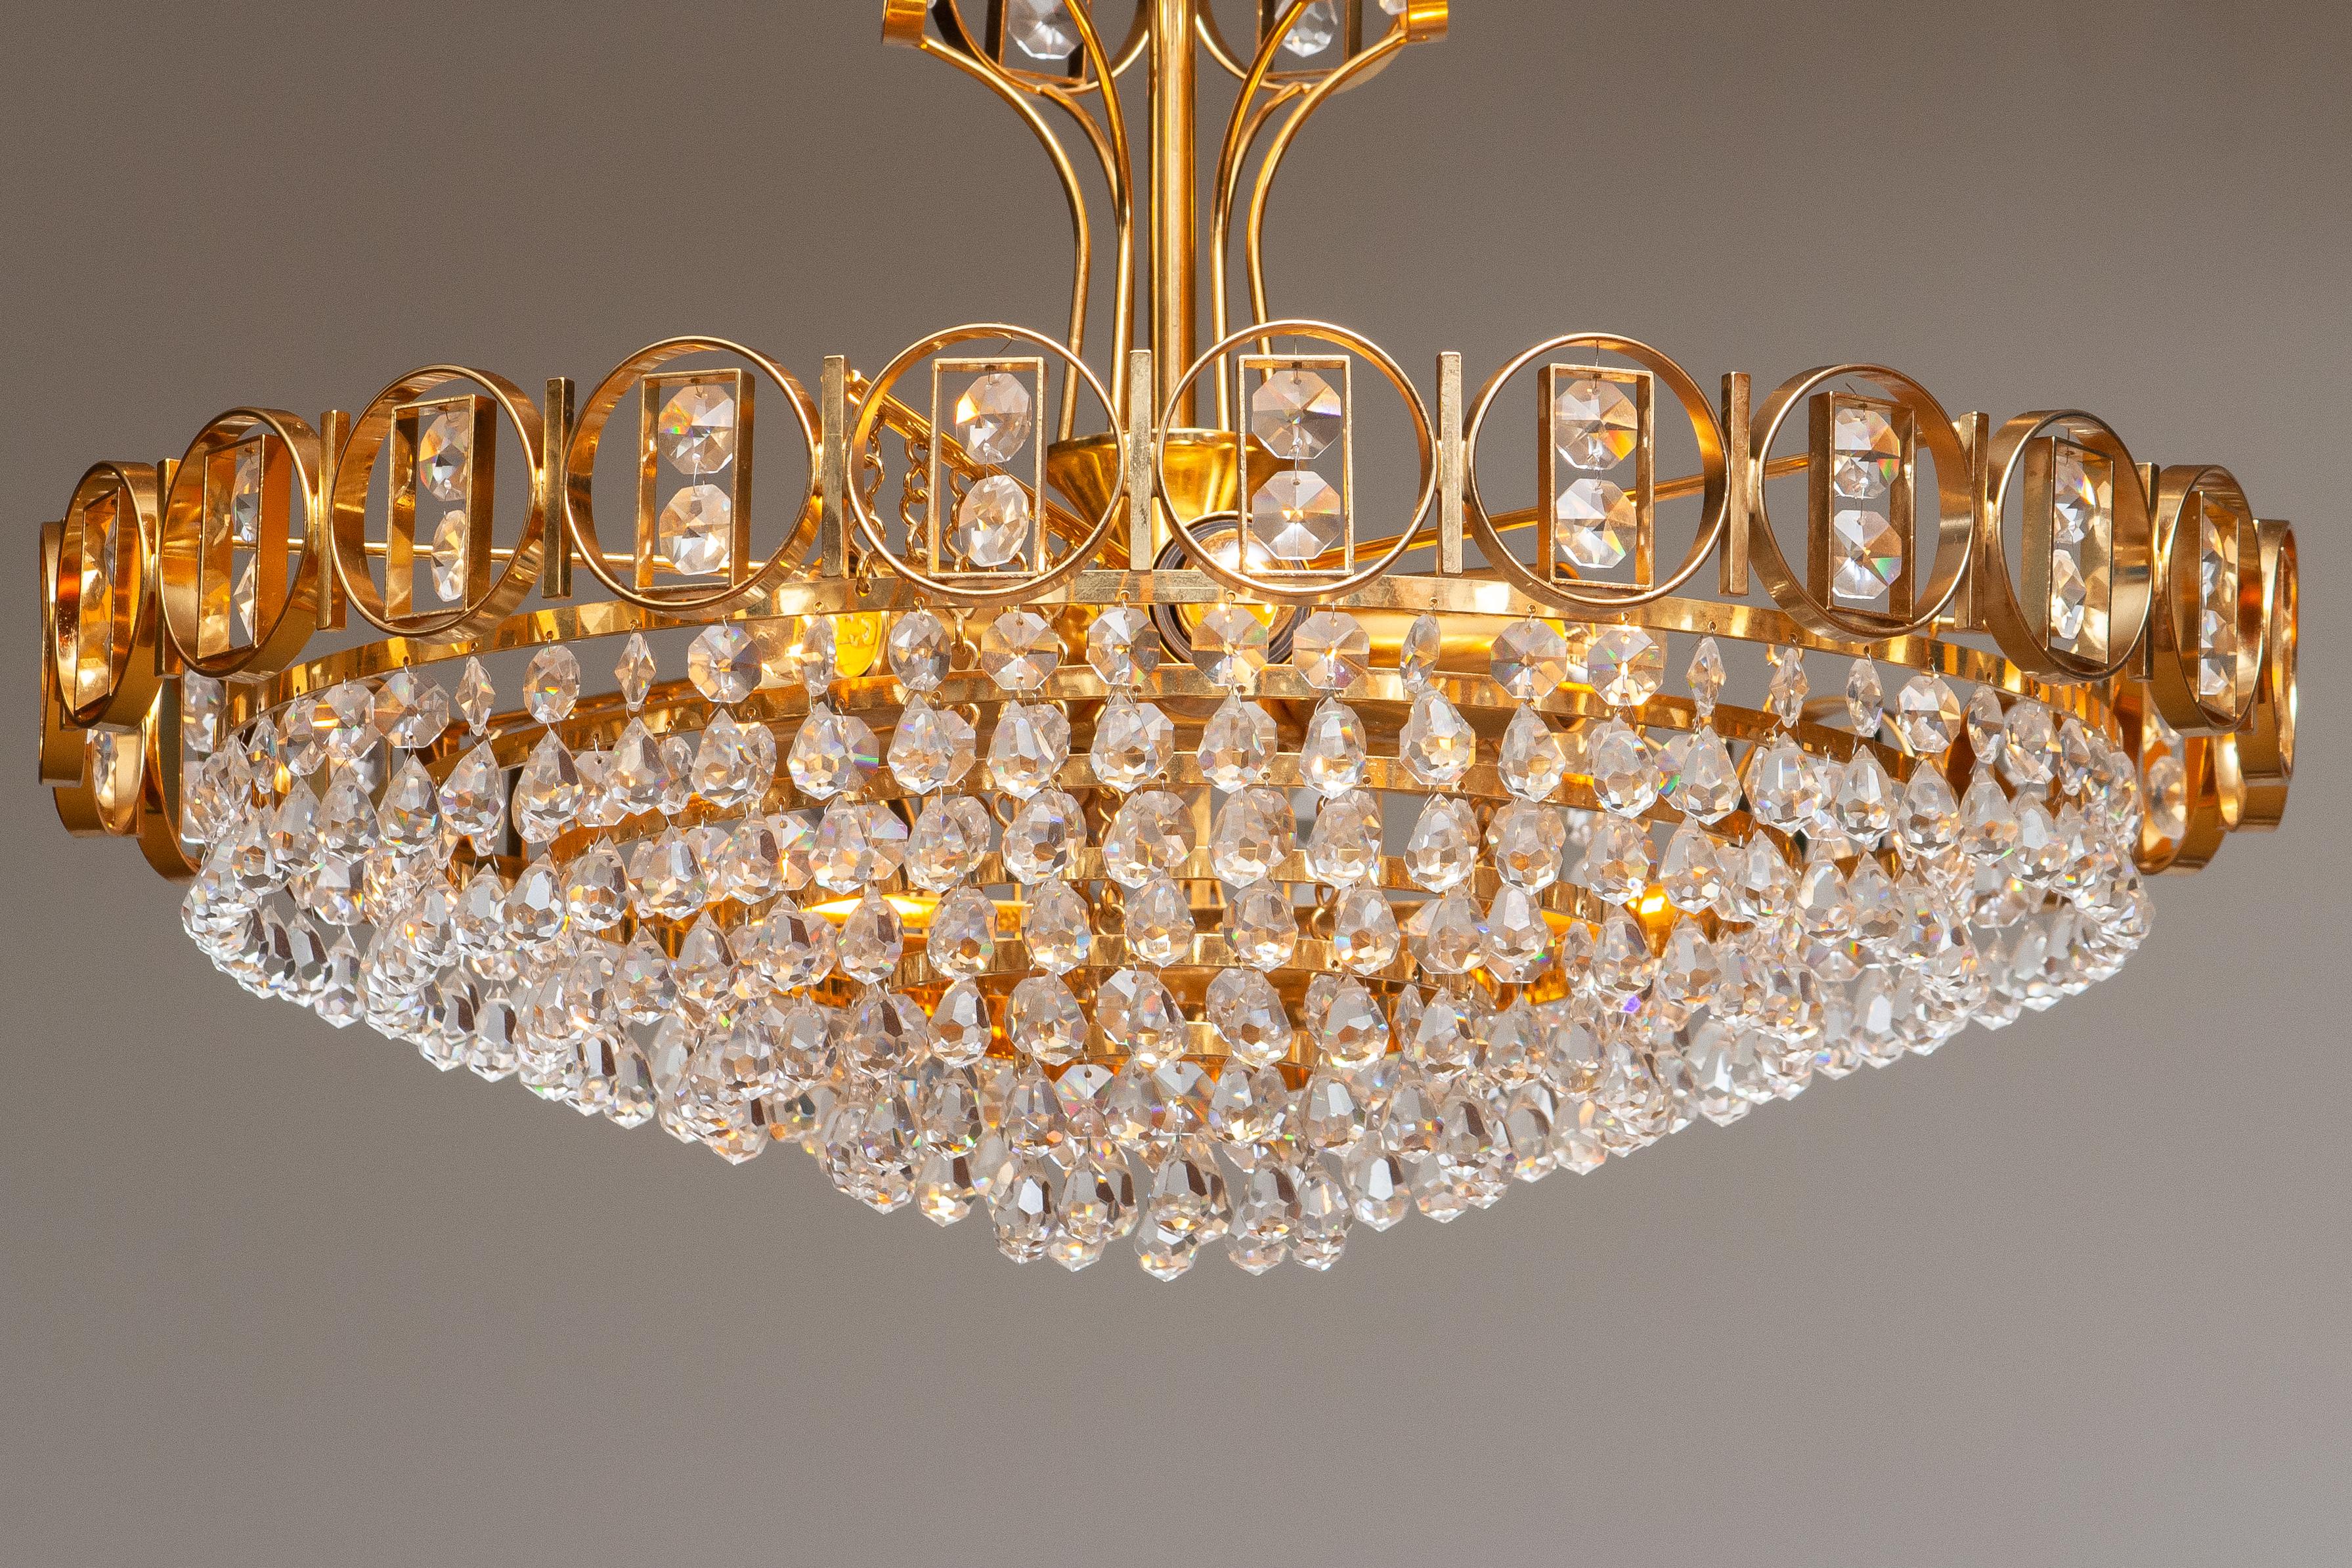 Mid-Century Modern 1970s, Gold-Plated Brass Chandelier with Faceted Crystals Made by Palwa, Germany For Sale